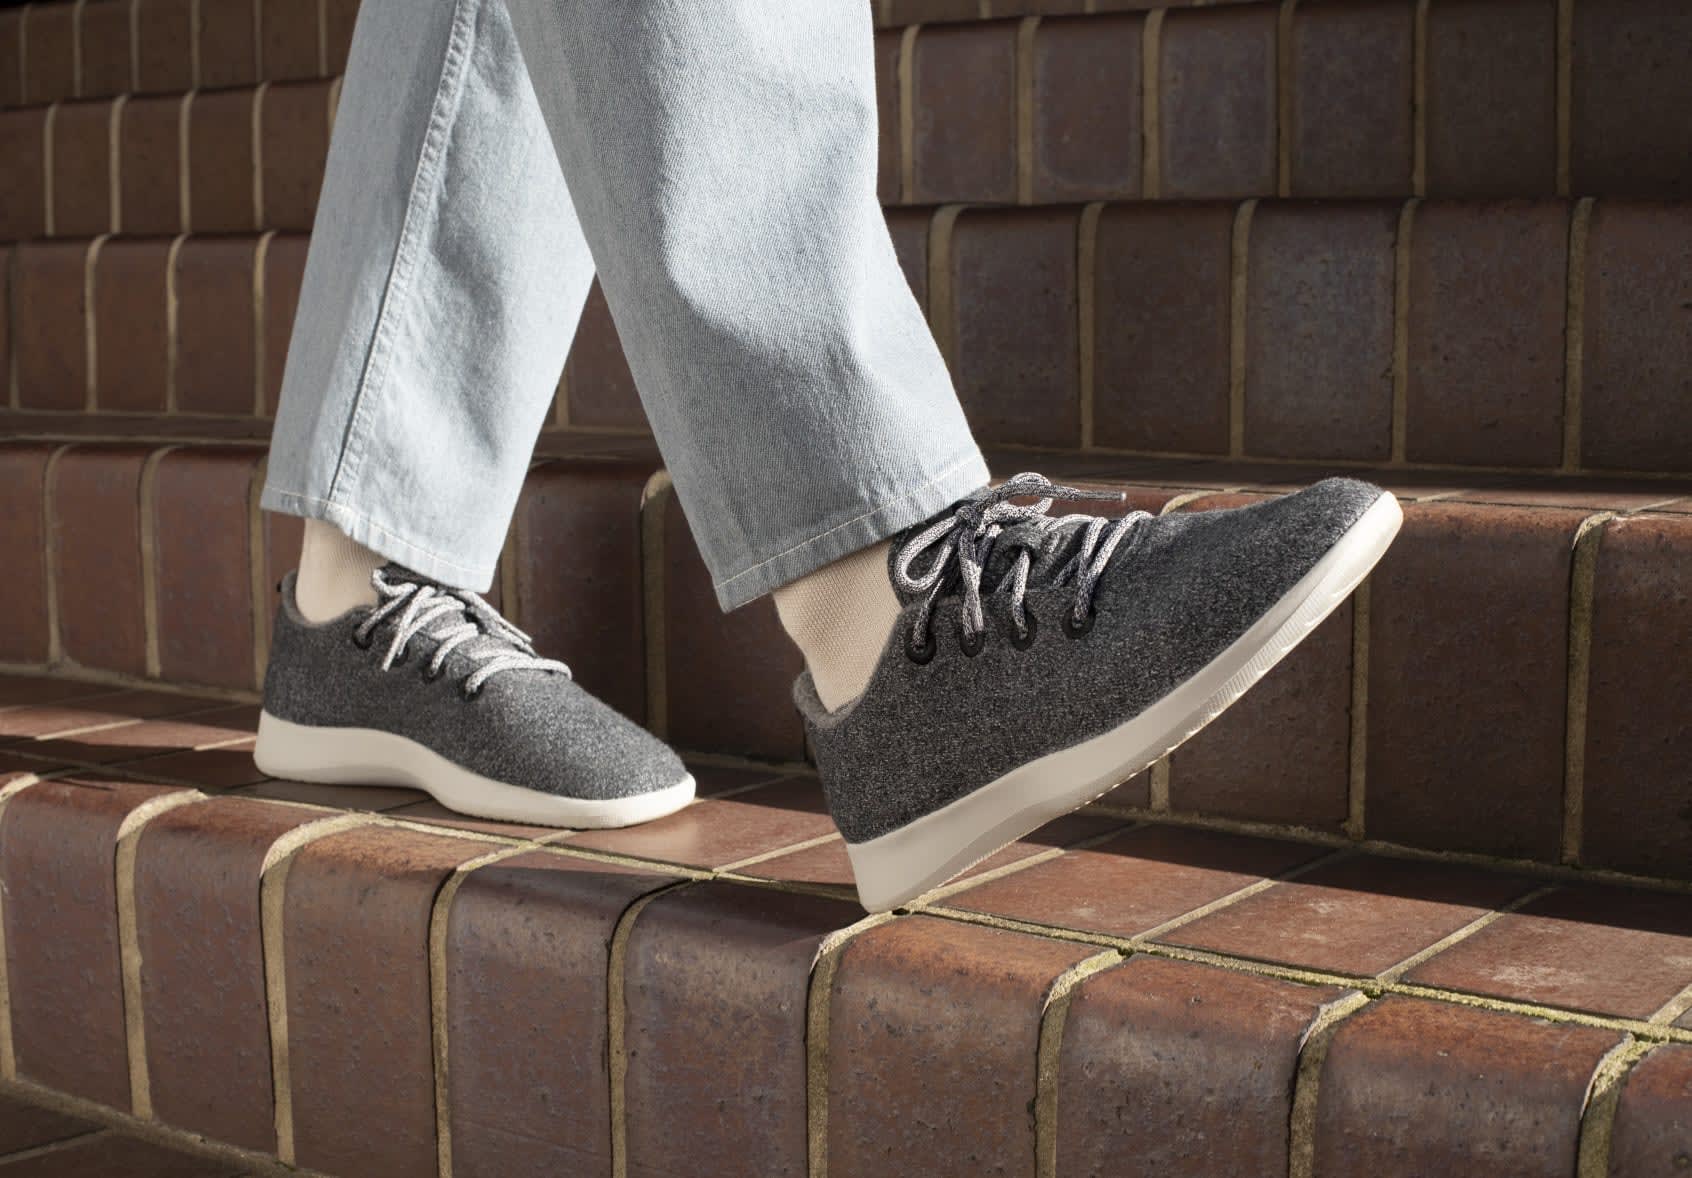 All Day, Everyday Shoes Made With Premium Natural Materials | Allbirds